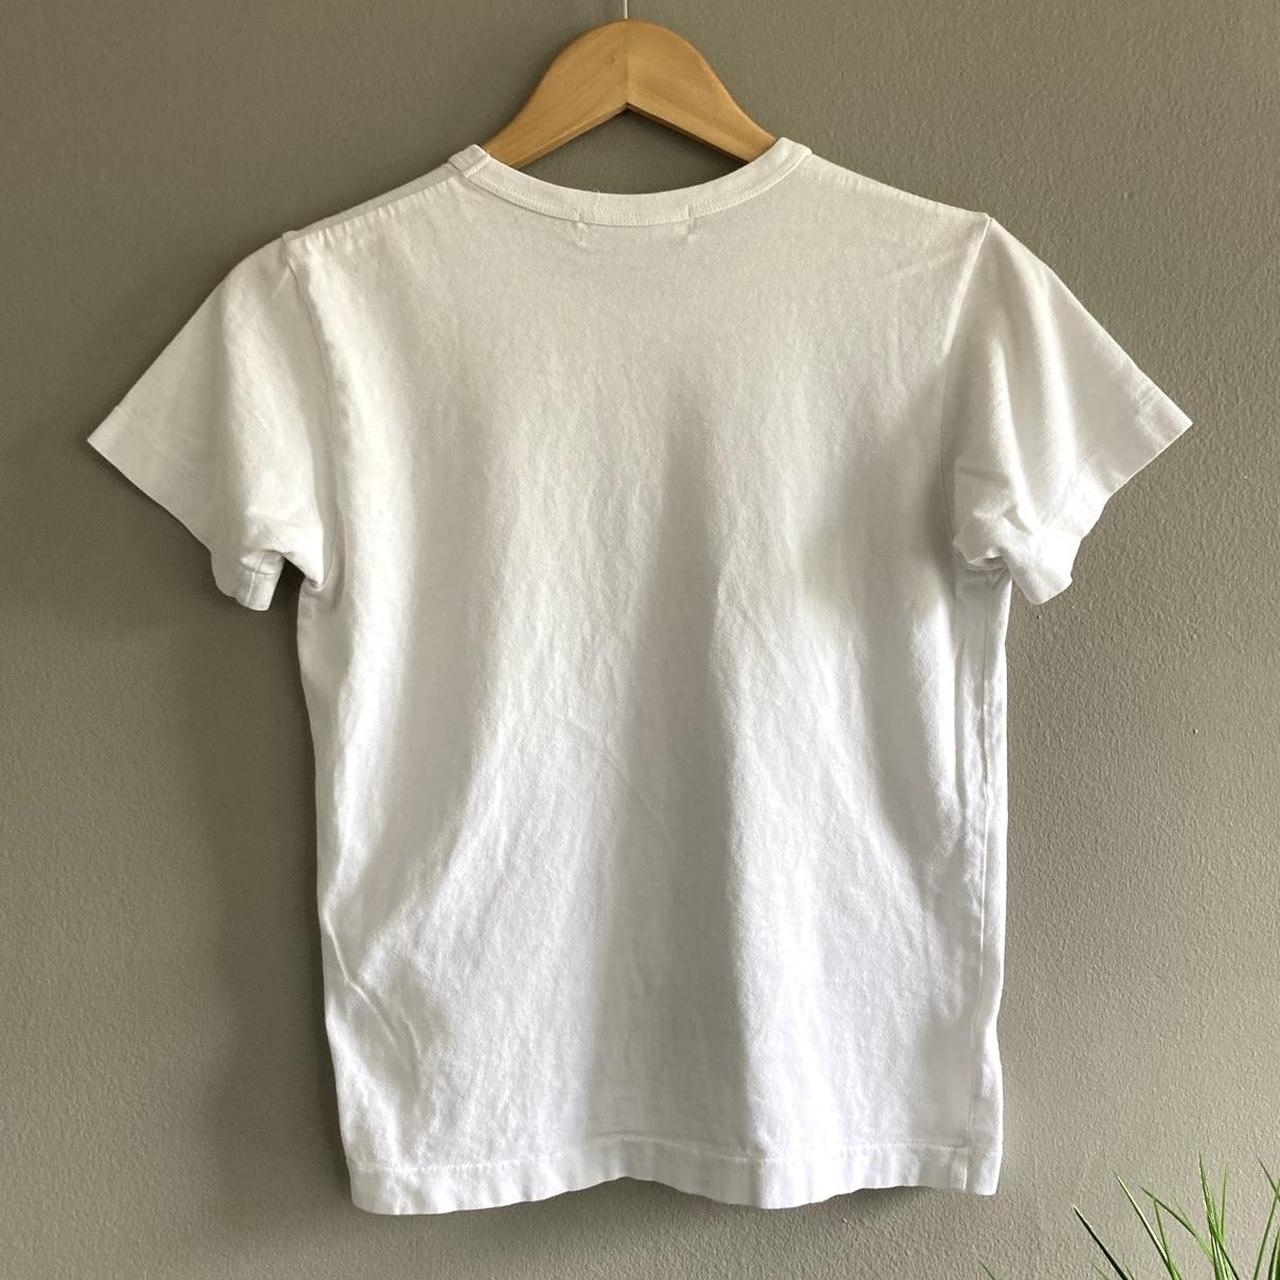 Comme des Garçons Play Women's White and Red T-shirt (2)